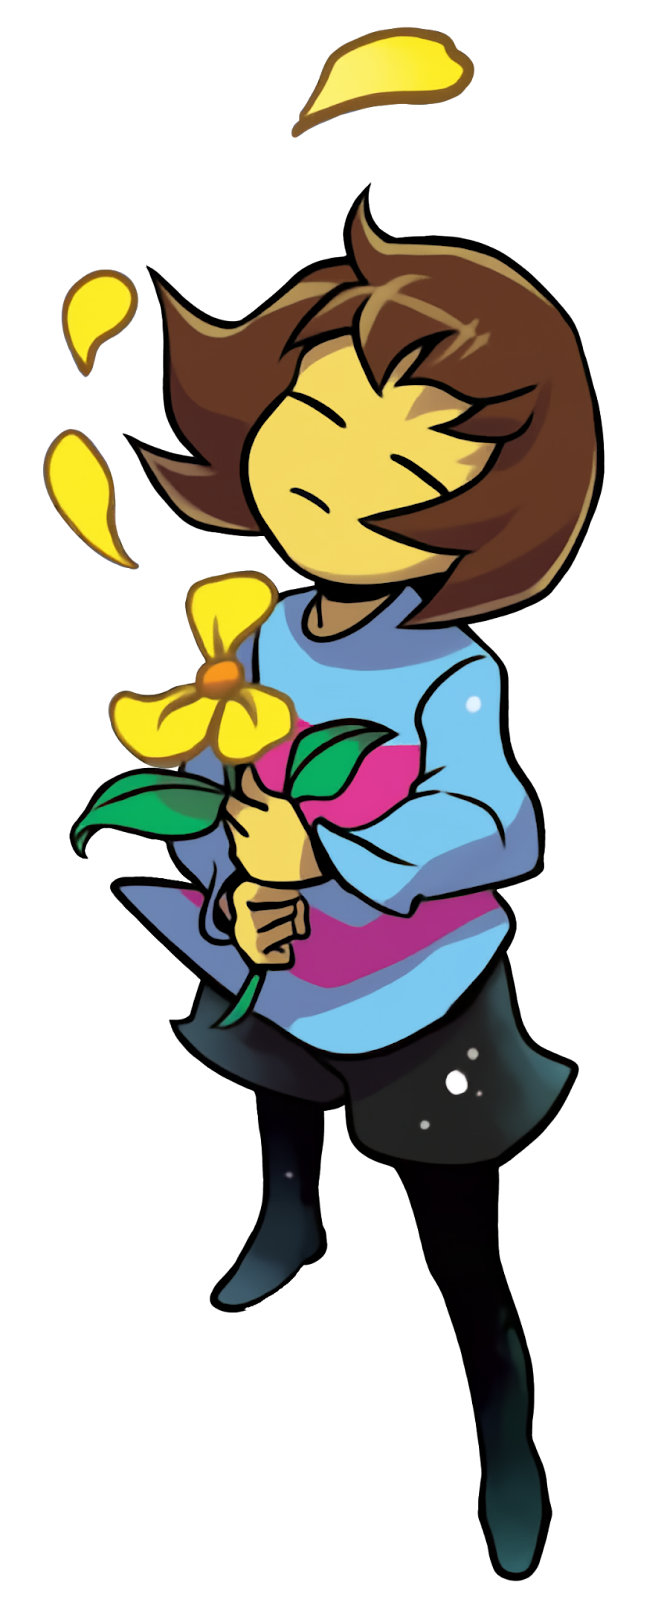 Encyclopedia — Hurting Omega Flowey, if running into bullets or